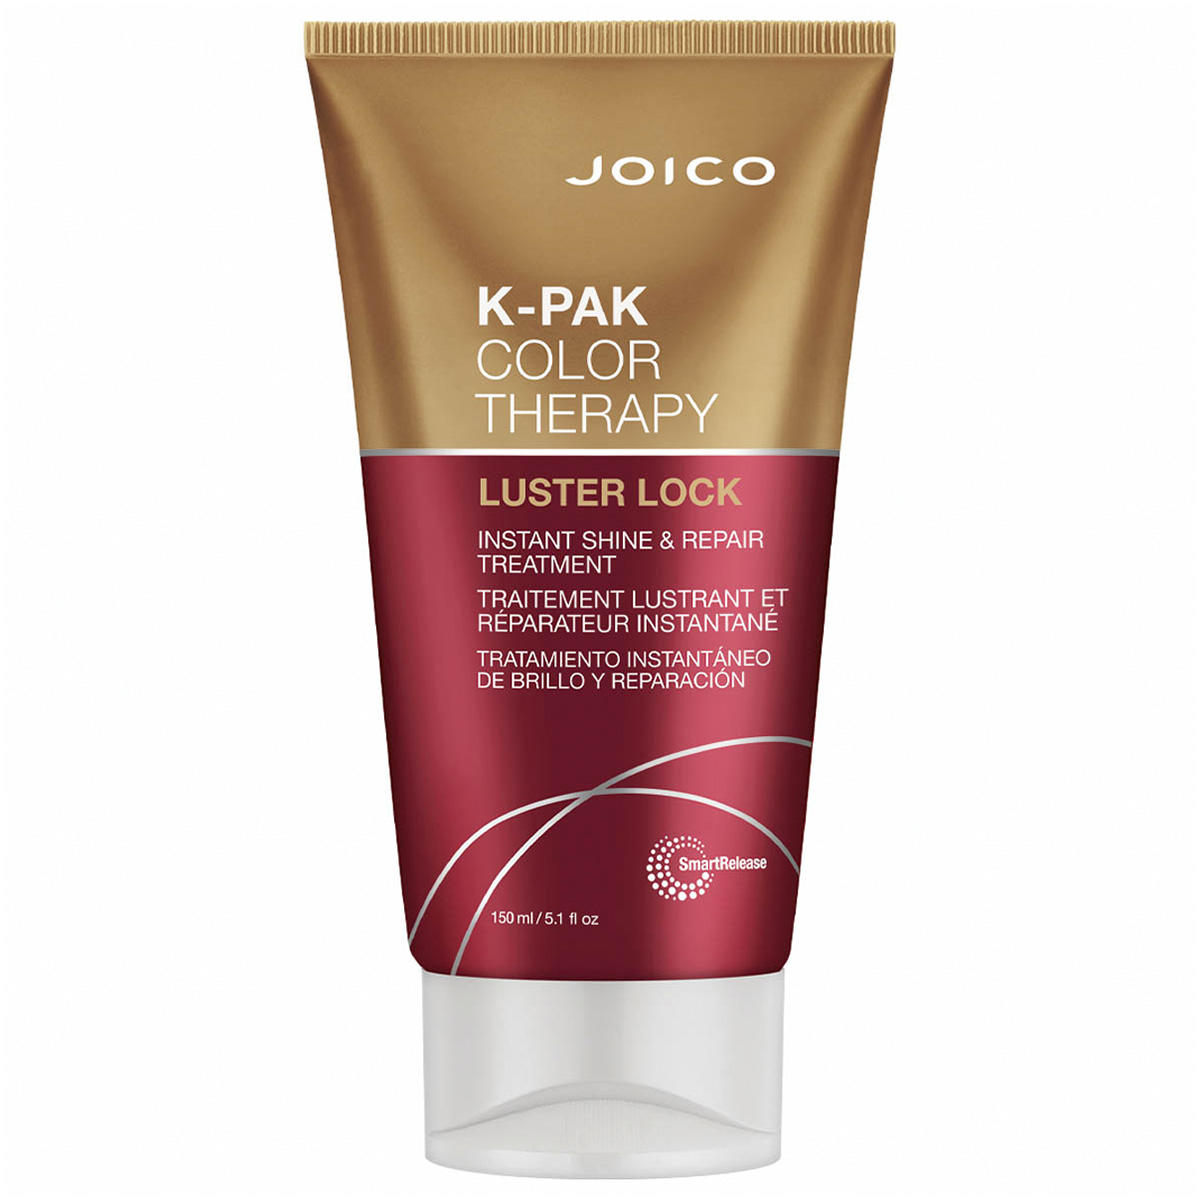 JOICO K-PAK Color Therapy Luster Lock Instant Shine & Repair Treatment 150 ml - 1